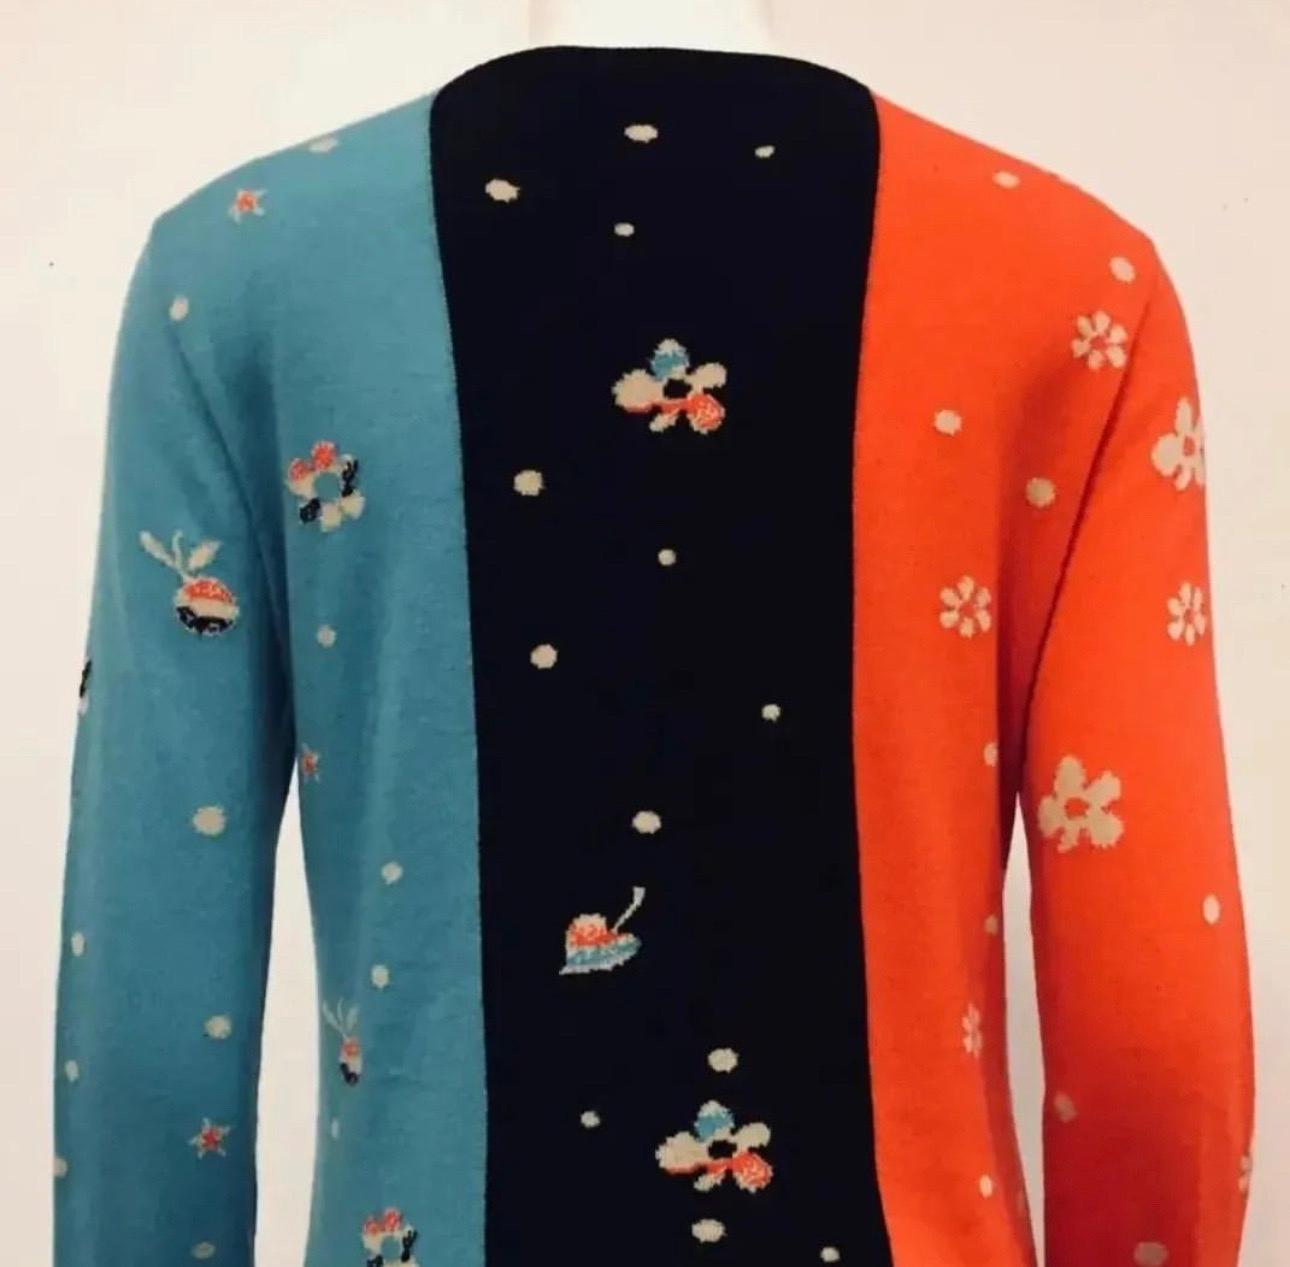 Chanel cashmere pullover sweater with whimsical print of man on a horse and Cupid with his arrow.
It's Chanel being playful! This round collar sweater with black knit trim and long sleeves features one in red and the other in turquoise. The front of